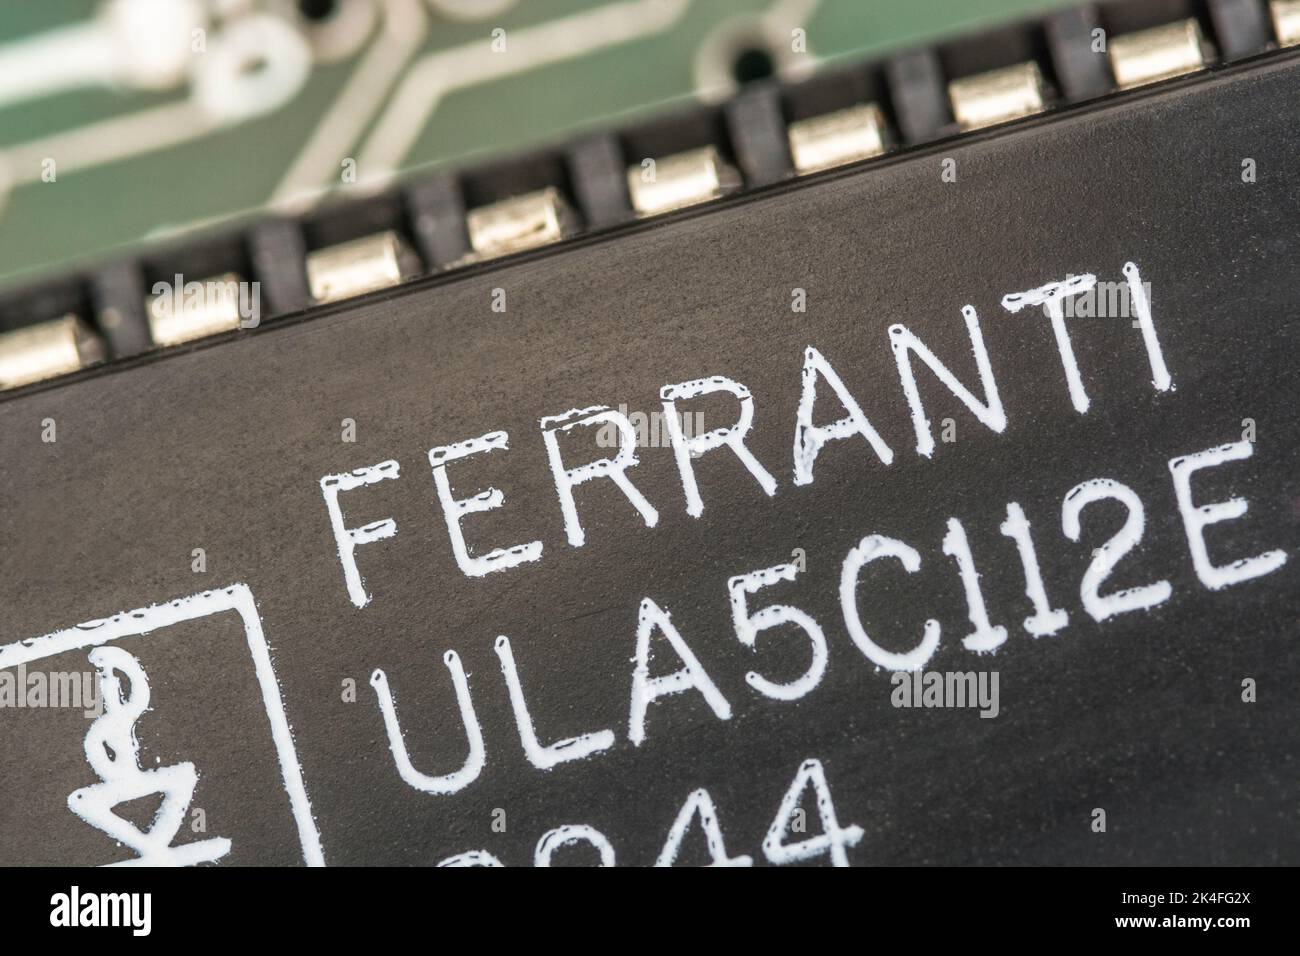 40-pin Ferranti ULA [Uncommitted Logic Array] on the motherboard of a 1982 16k Sinclair ZX Spectrum computer. For integrated circuits, electronics. Stock Photo